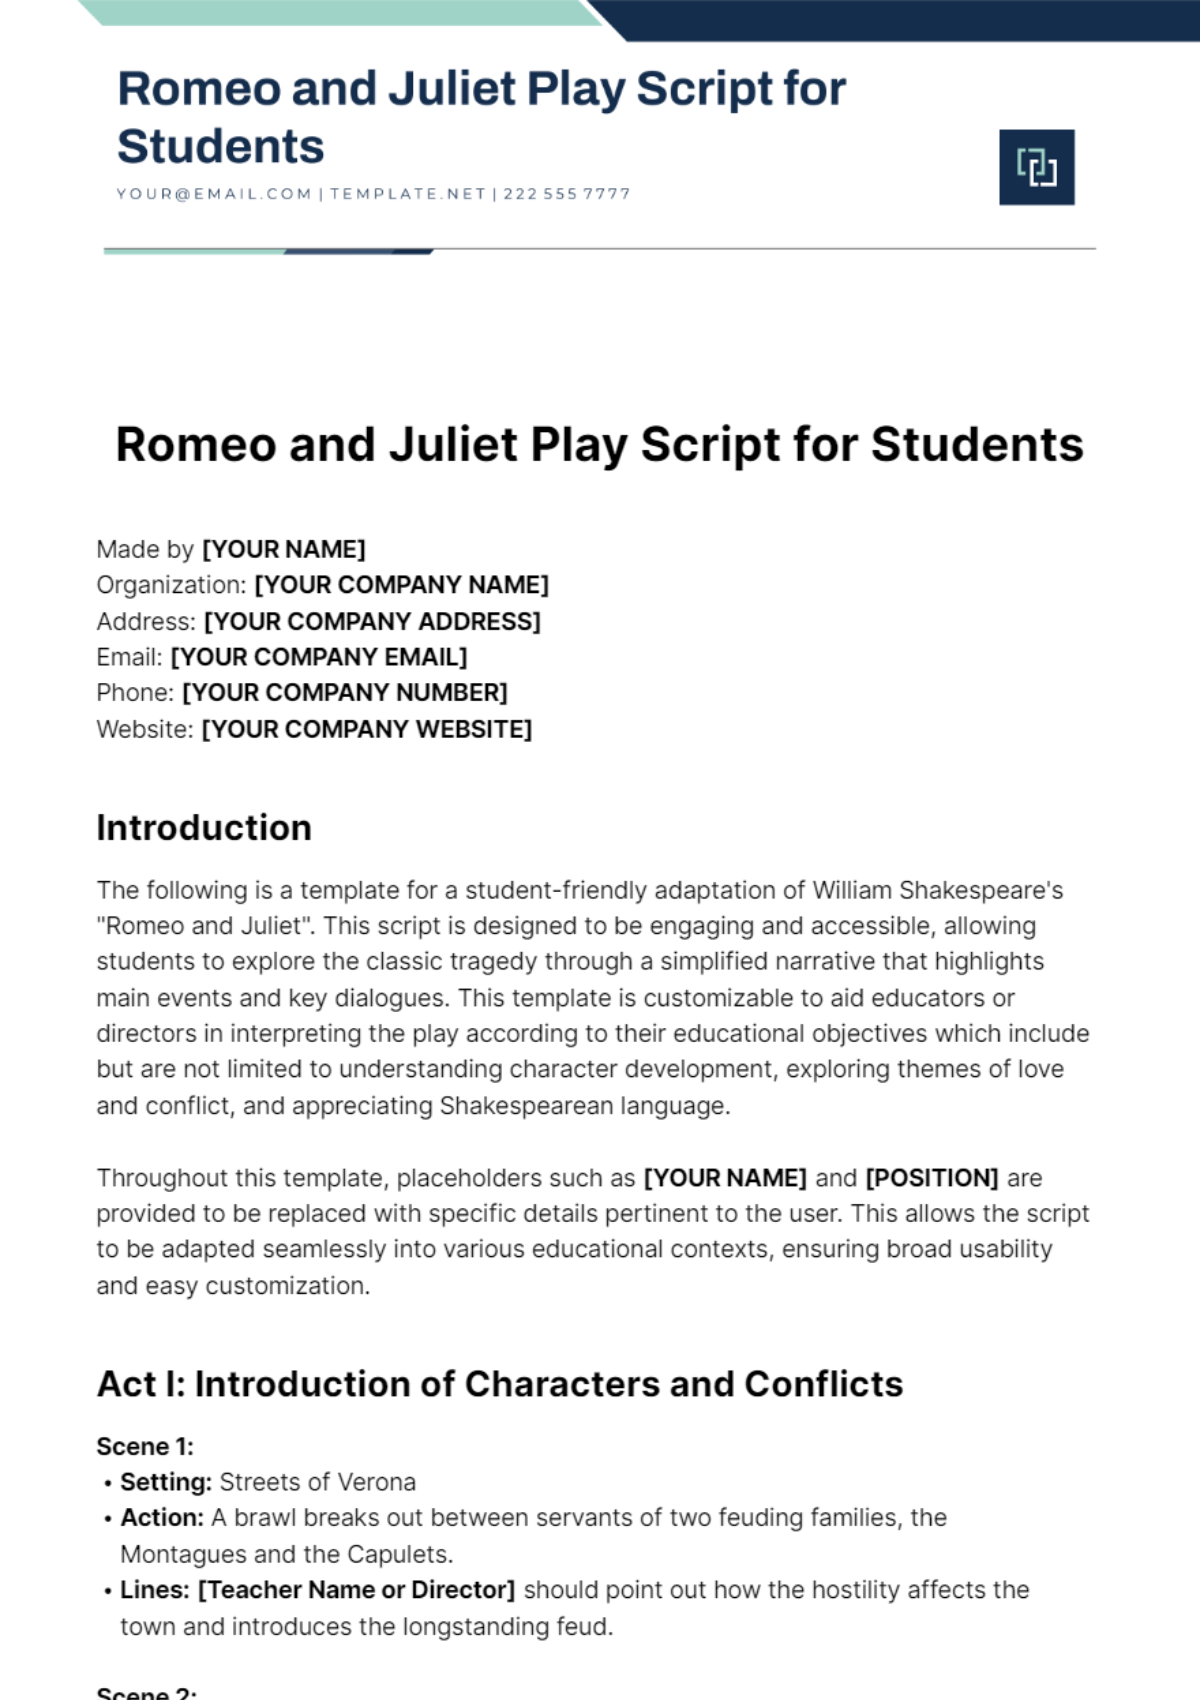 Romeo And Juliet Play Script For Students Template